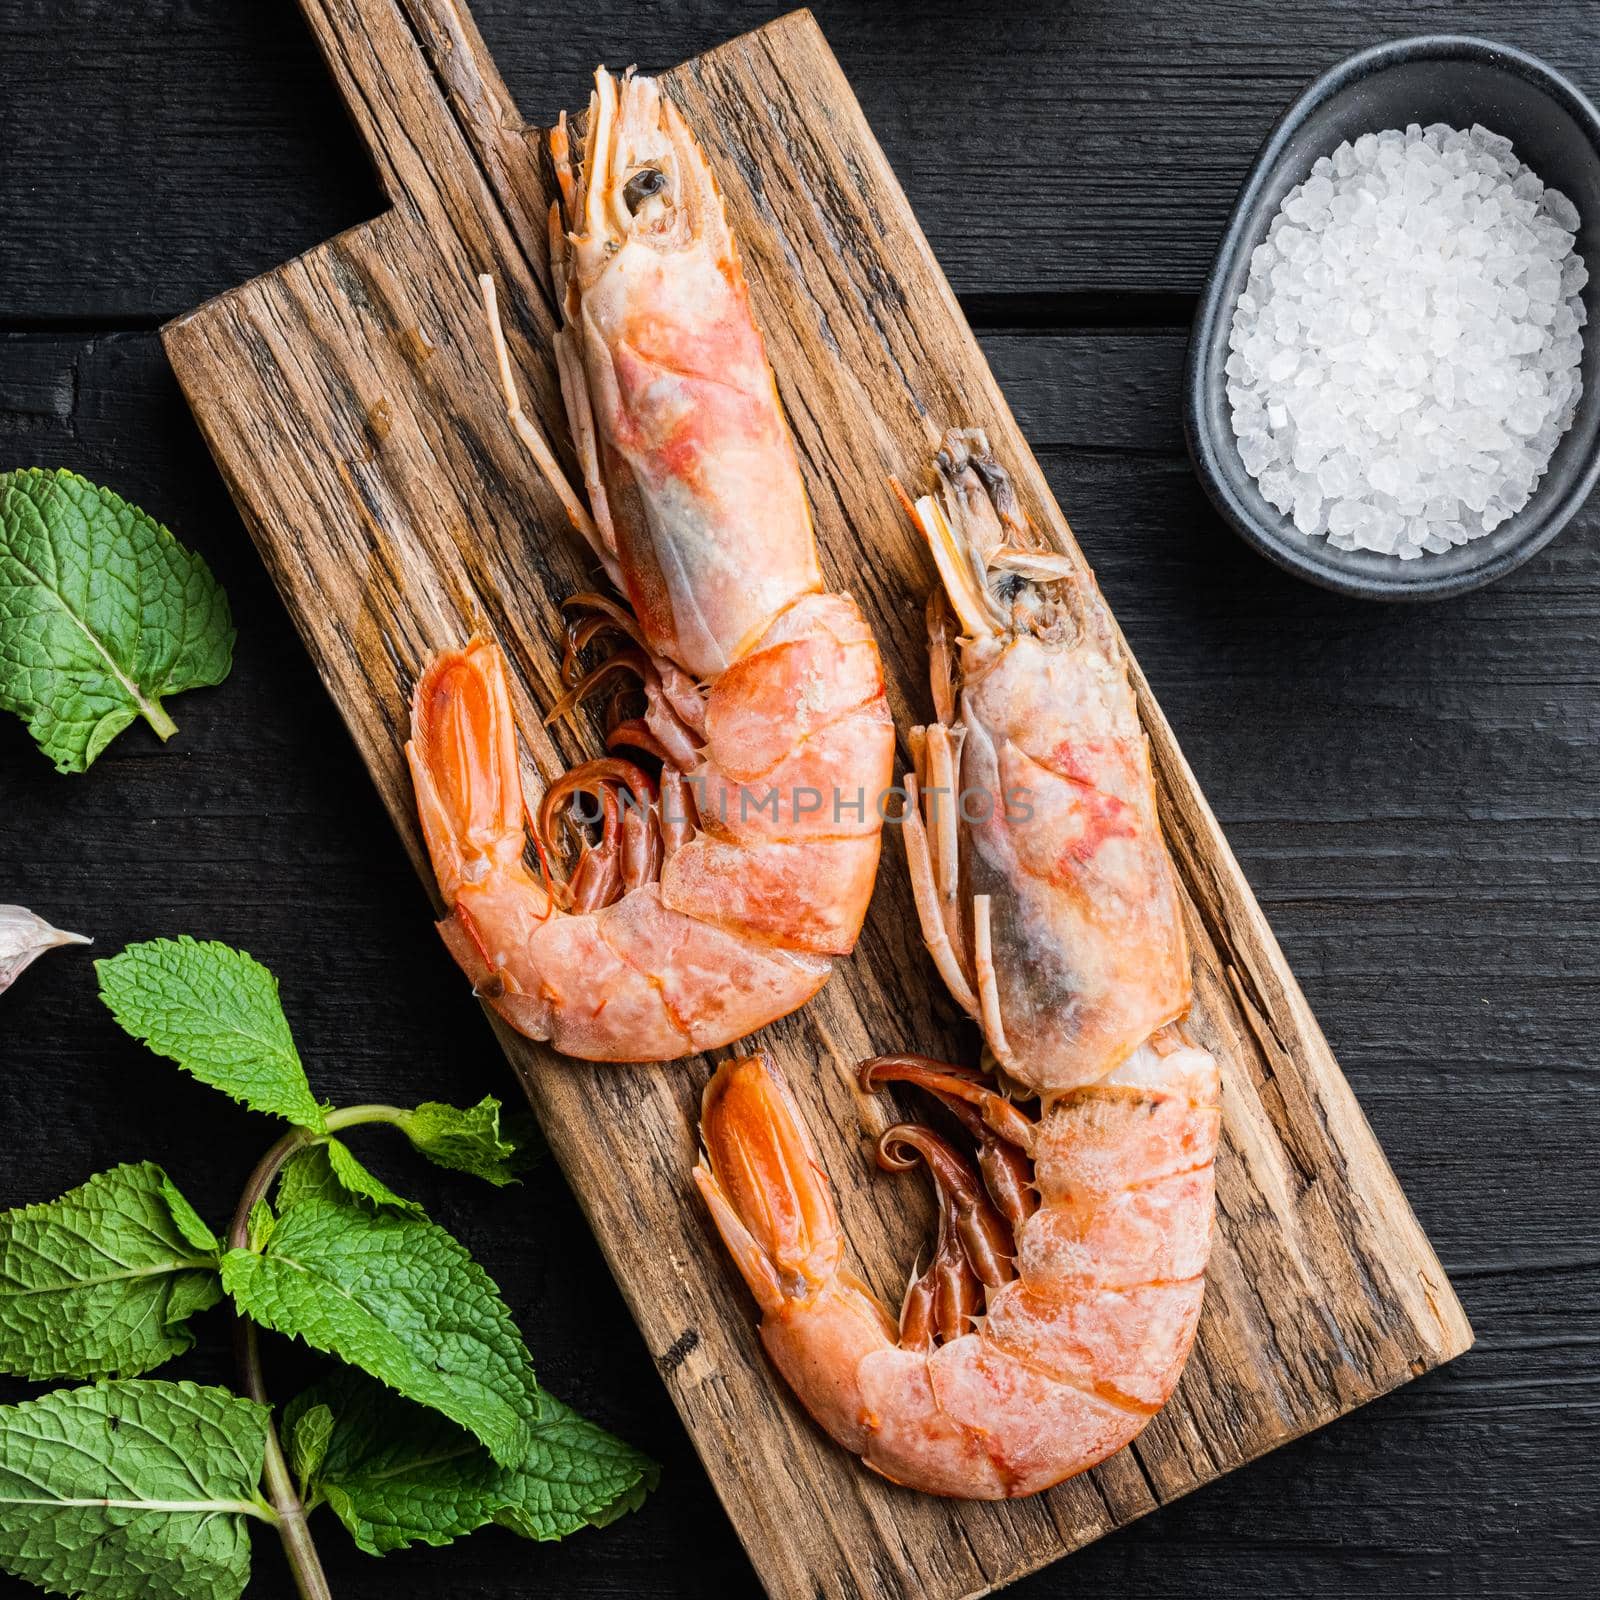 Seafood scampi on wooden board on black wooden background, flat lay, food photo.